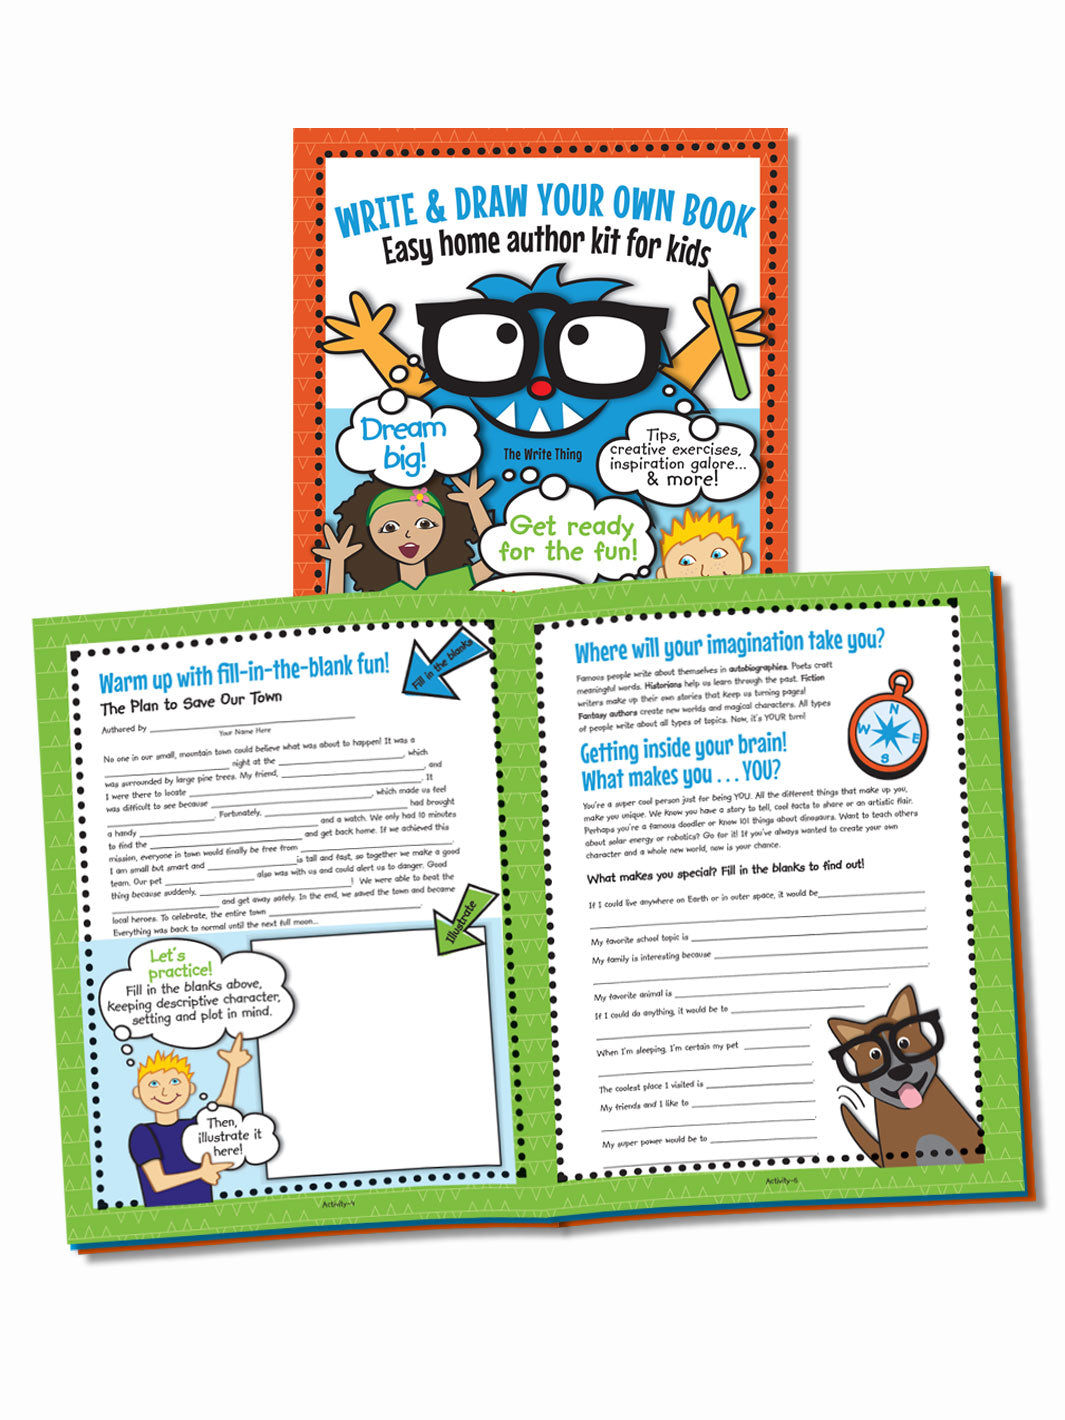 Write & Draw Your Own Book: Easy Home Author Kit For Kids